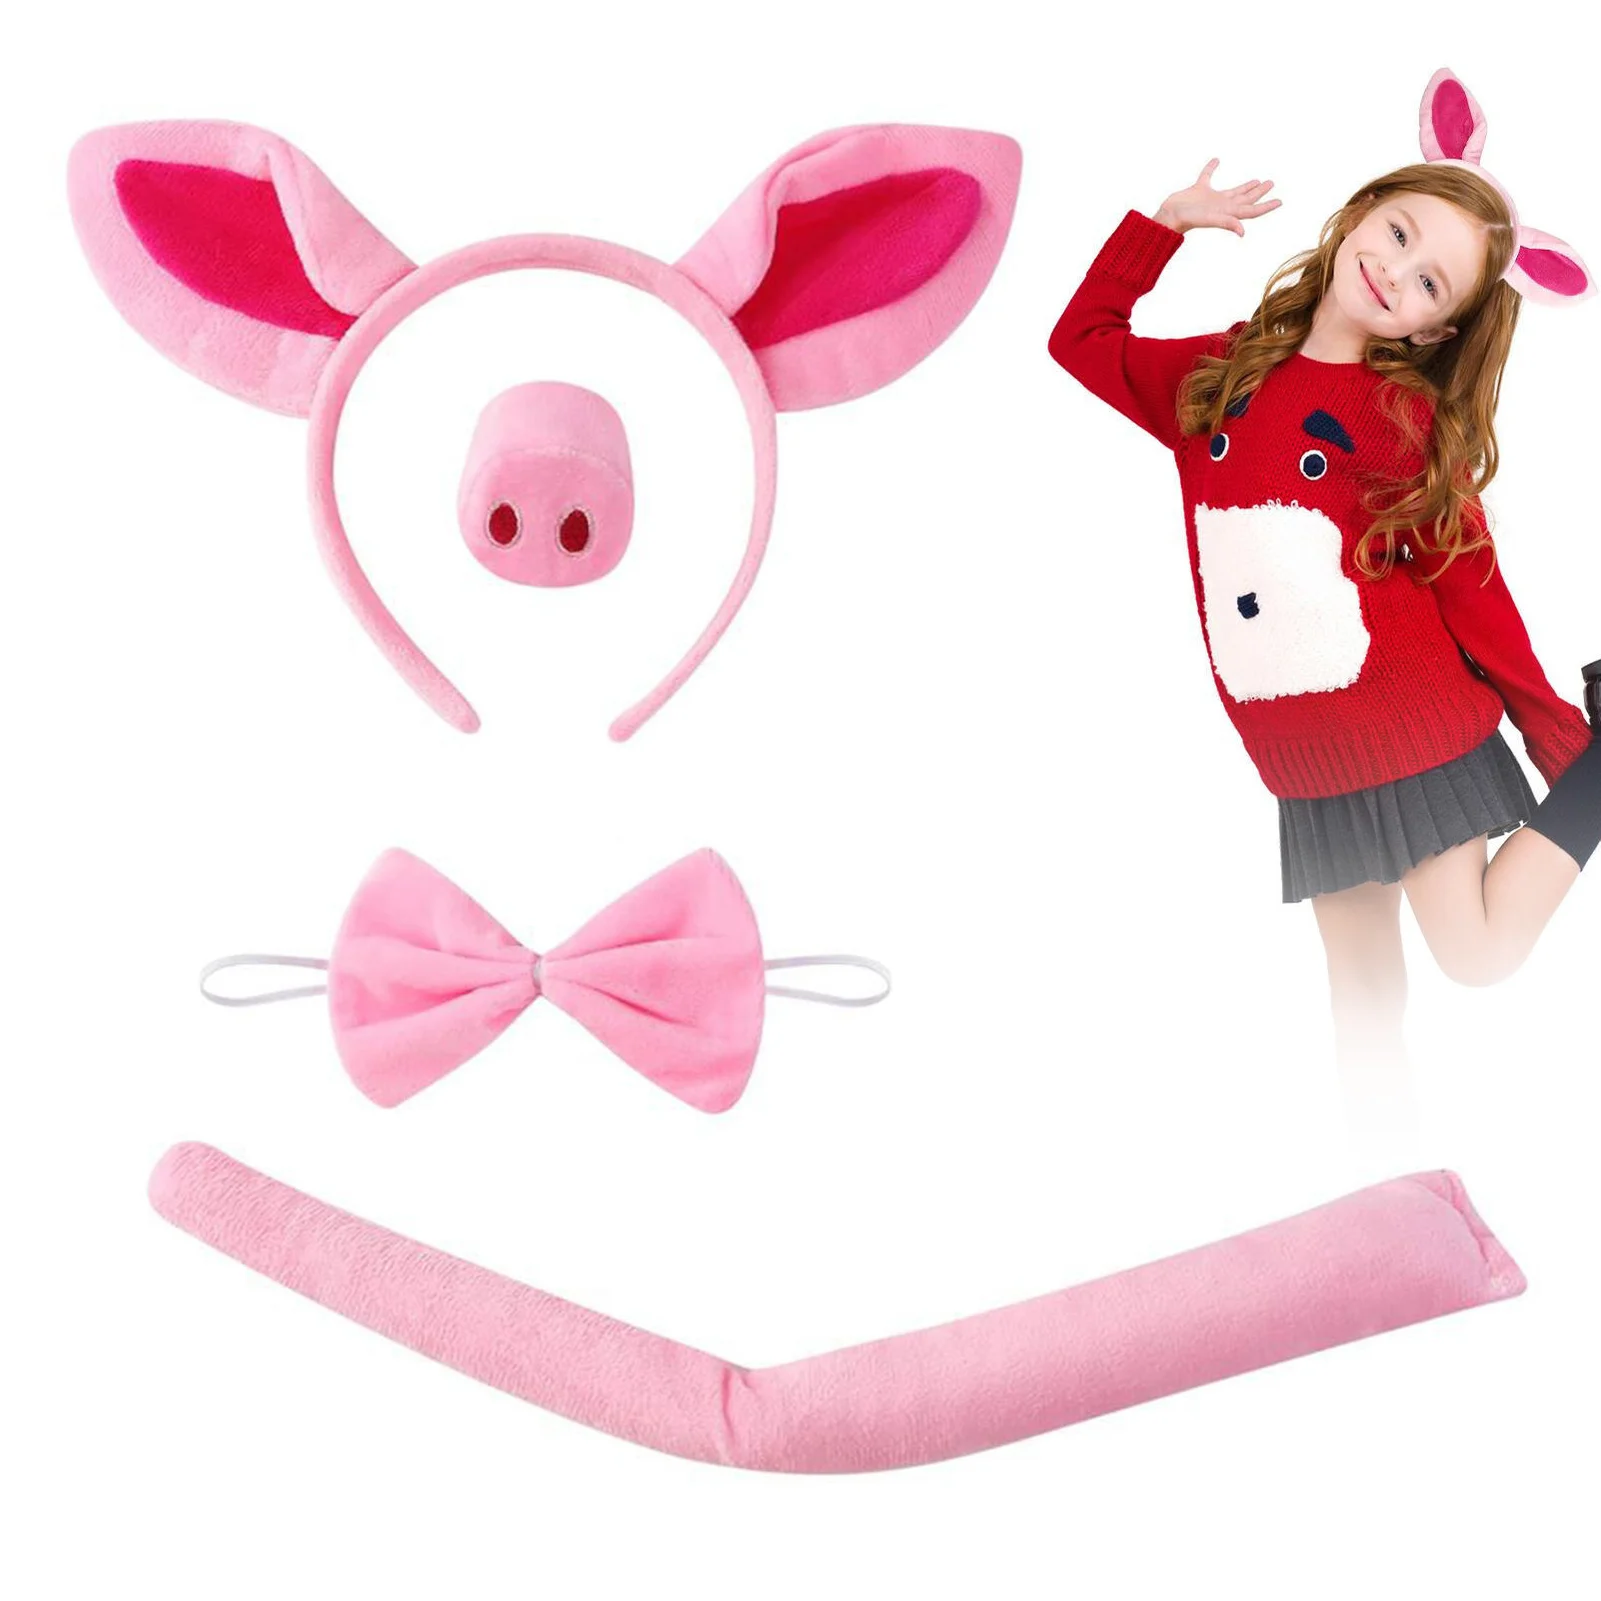 

4pcs Pink Pig Costume Set for Kids Pig Nose Tail Ears Headband and Bowtie for Costume Parties Dress up Play